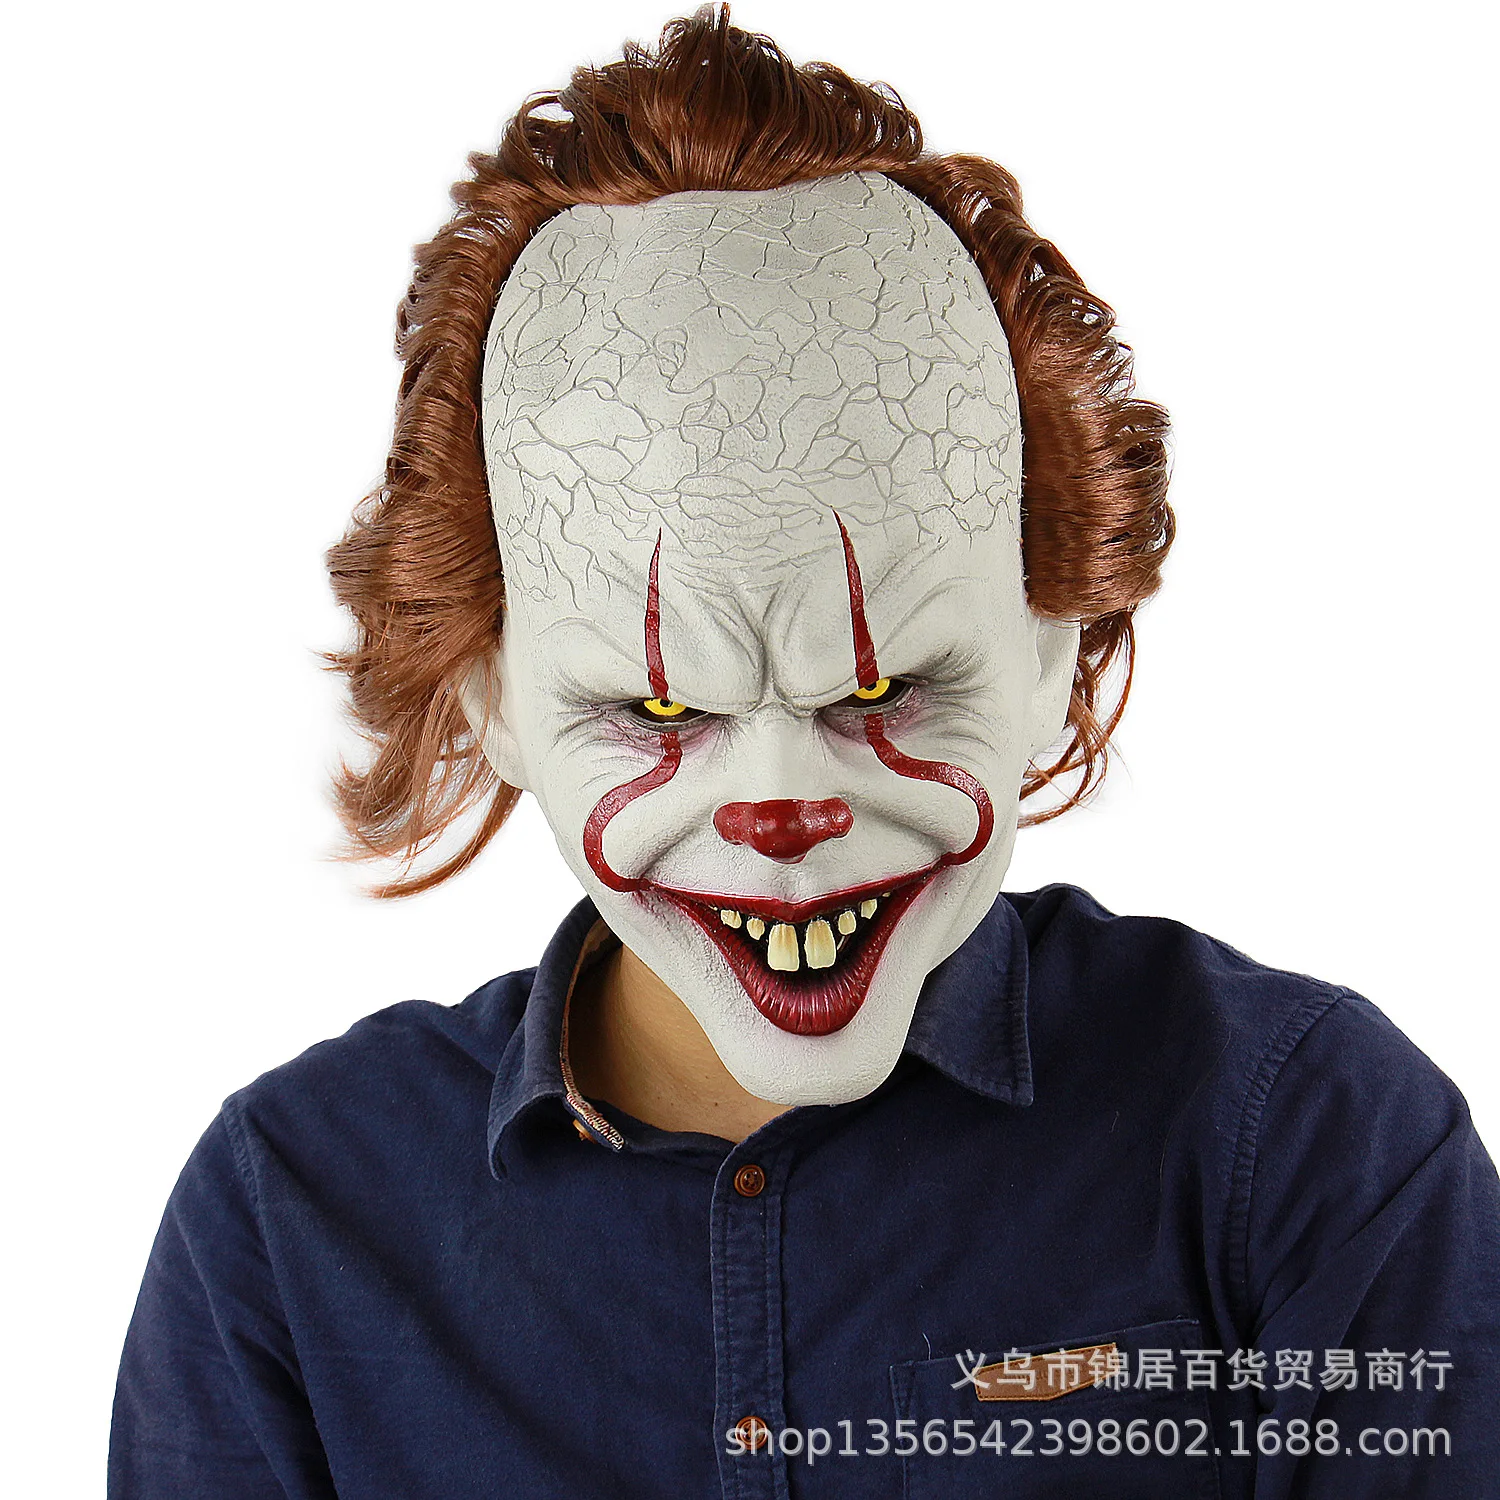 Movie Stephen King's IT Clown Pennywise Halloween Cosplay Party Resin Mask Props 